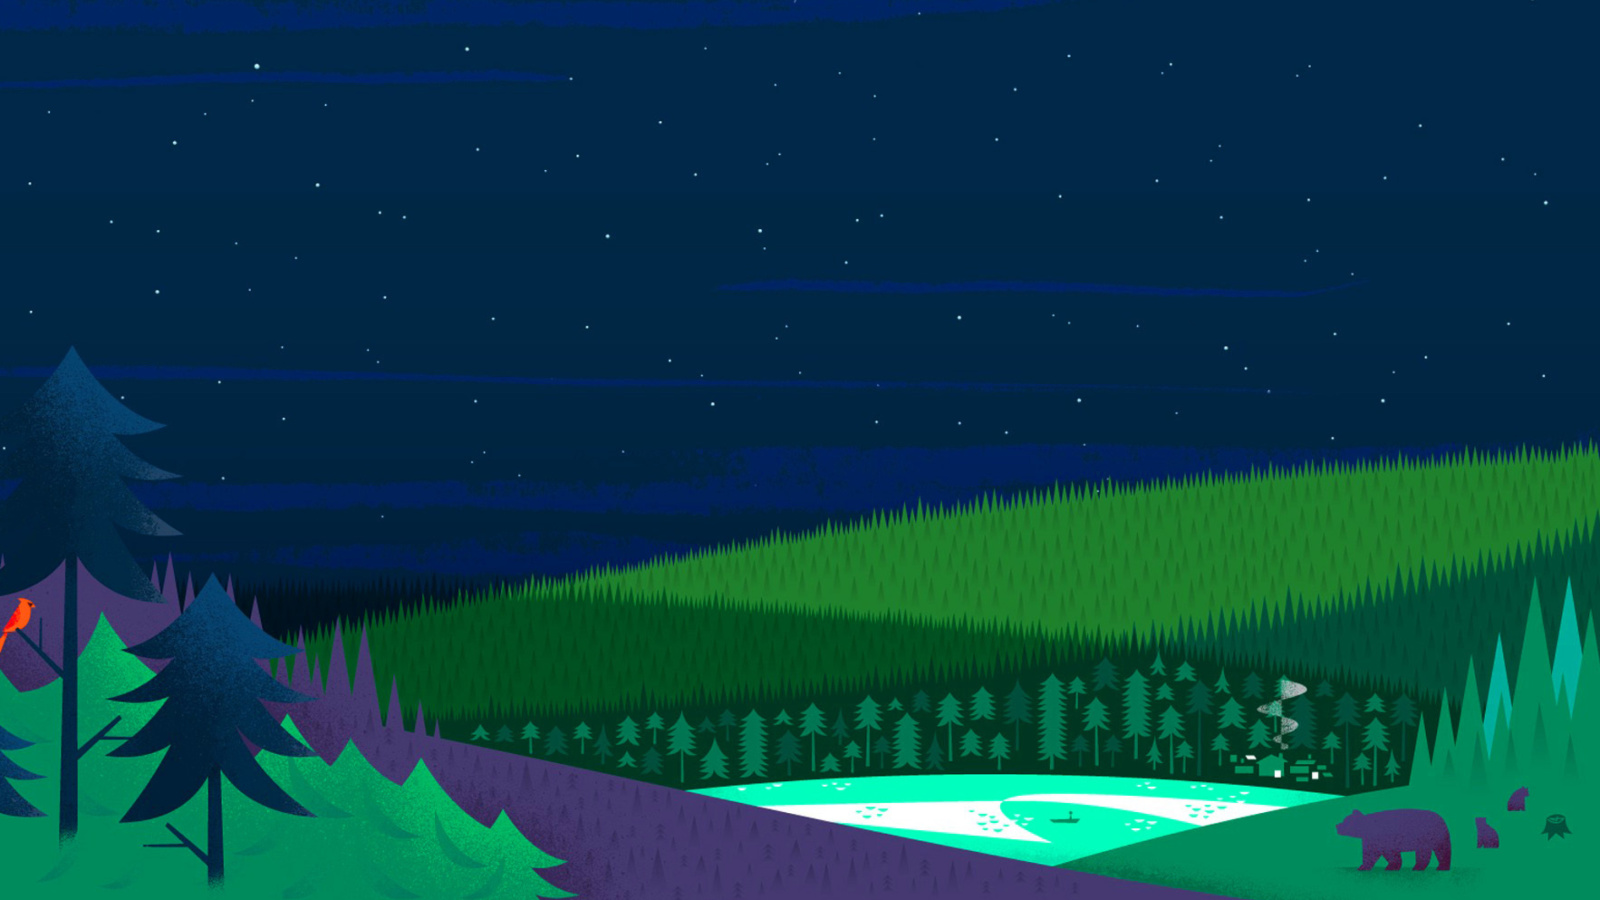 Graphics night and bears in forest wallpaper 1600x900